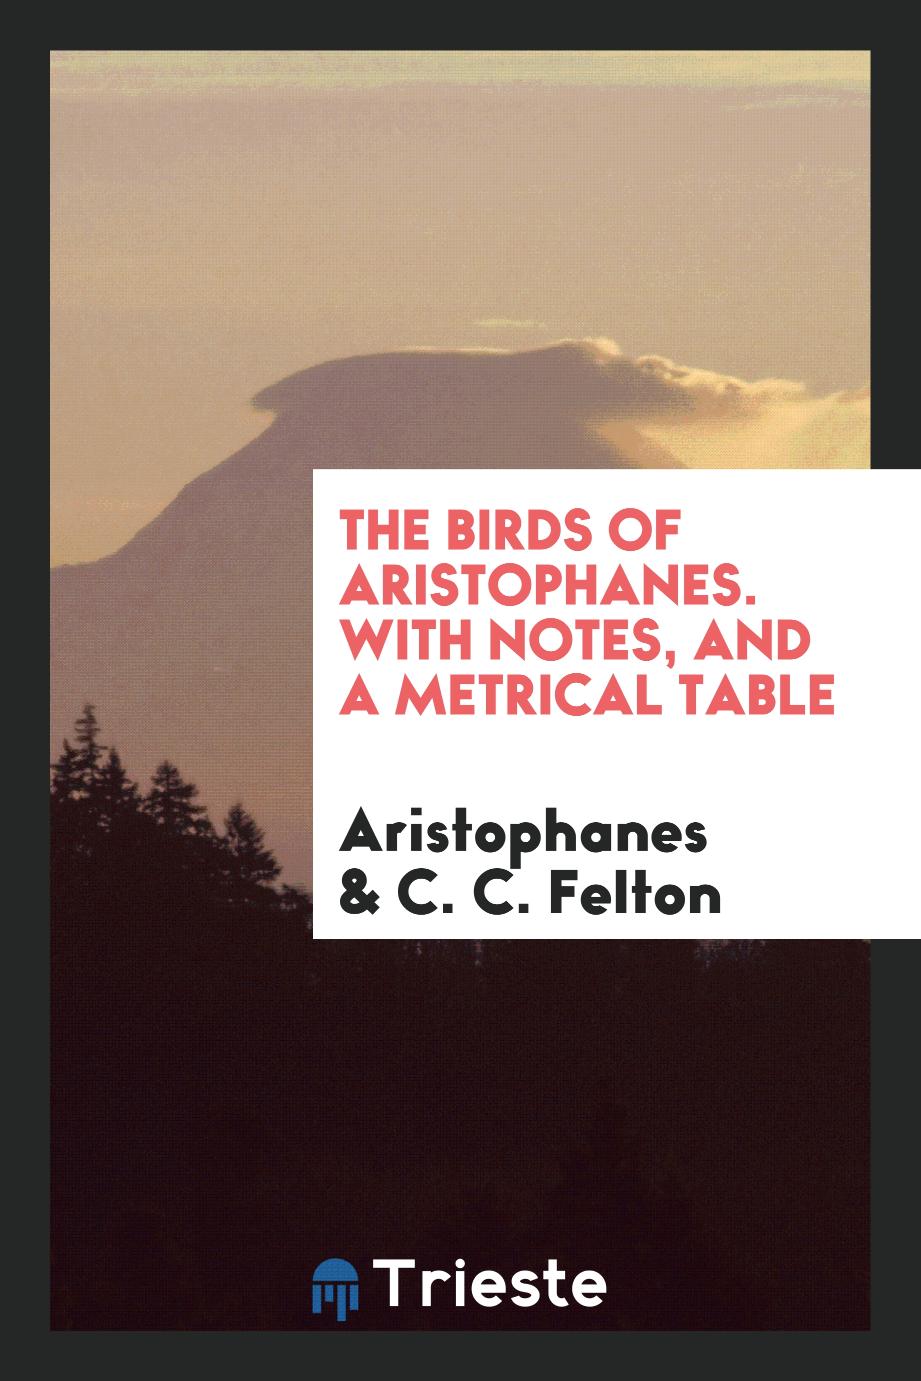 The Birds of Aristophanes. With Notes, and a Metrical Table